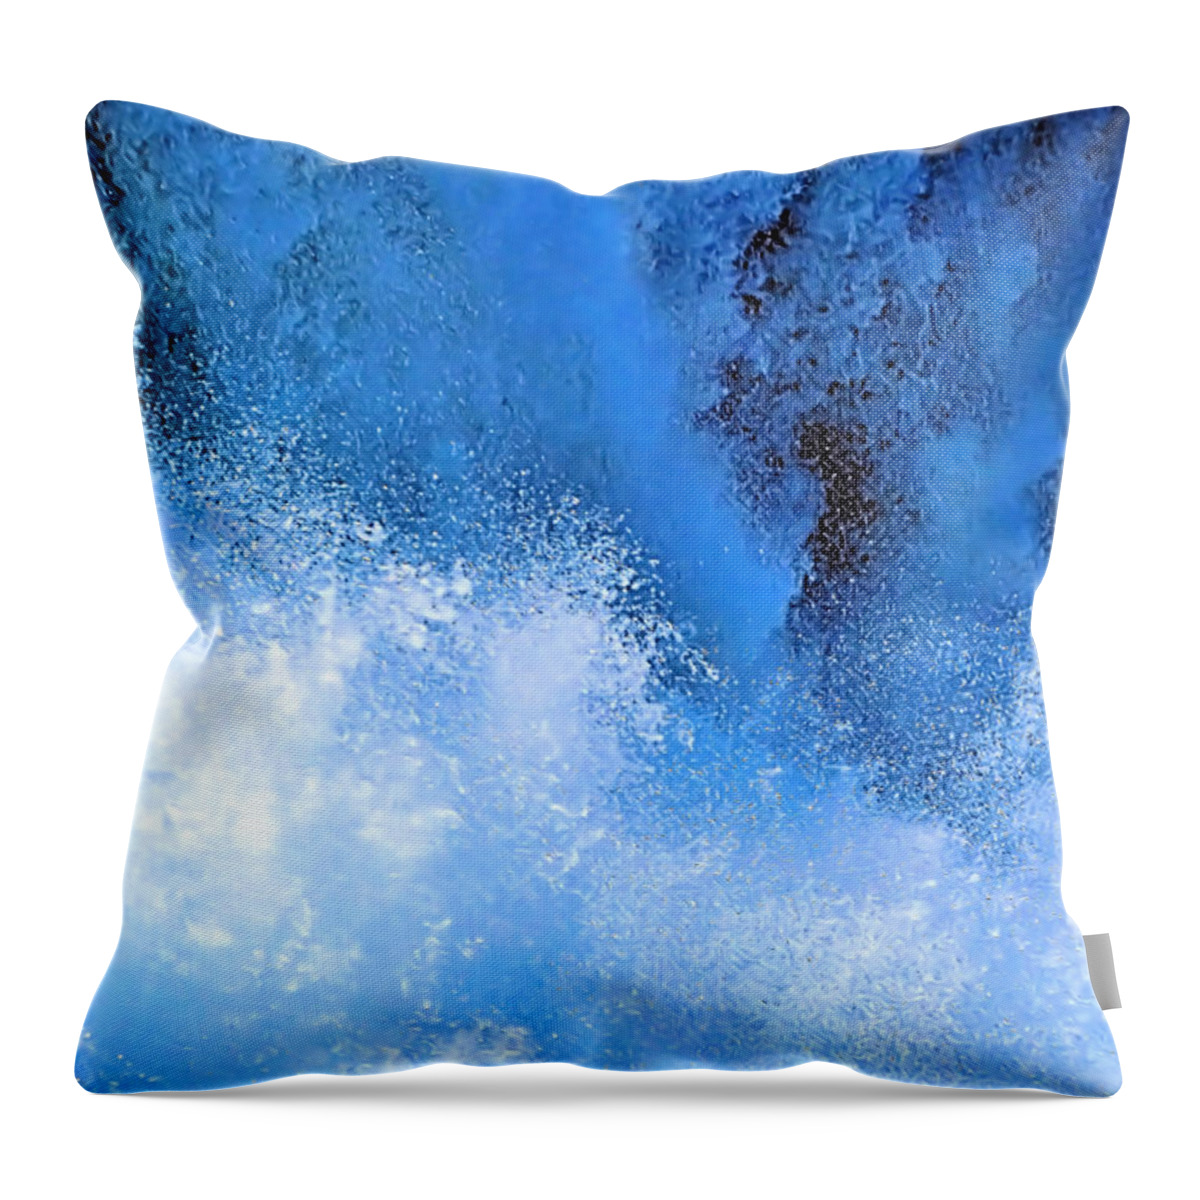 Niagara Falls Throw Pillow featuring the photograph Deadly Gorgeous by Elizabeth Dow